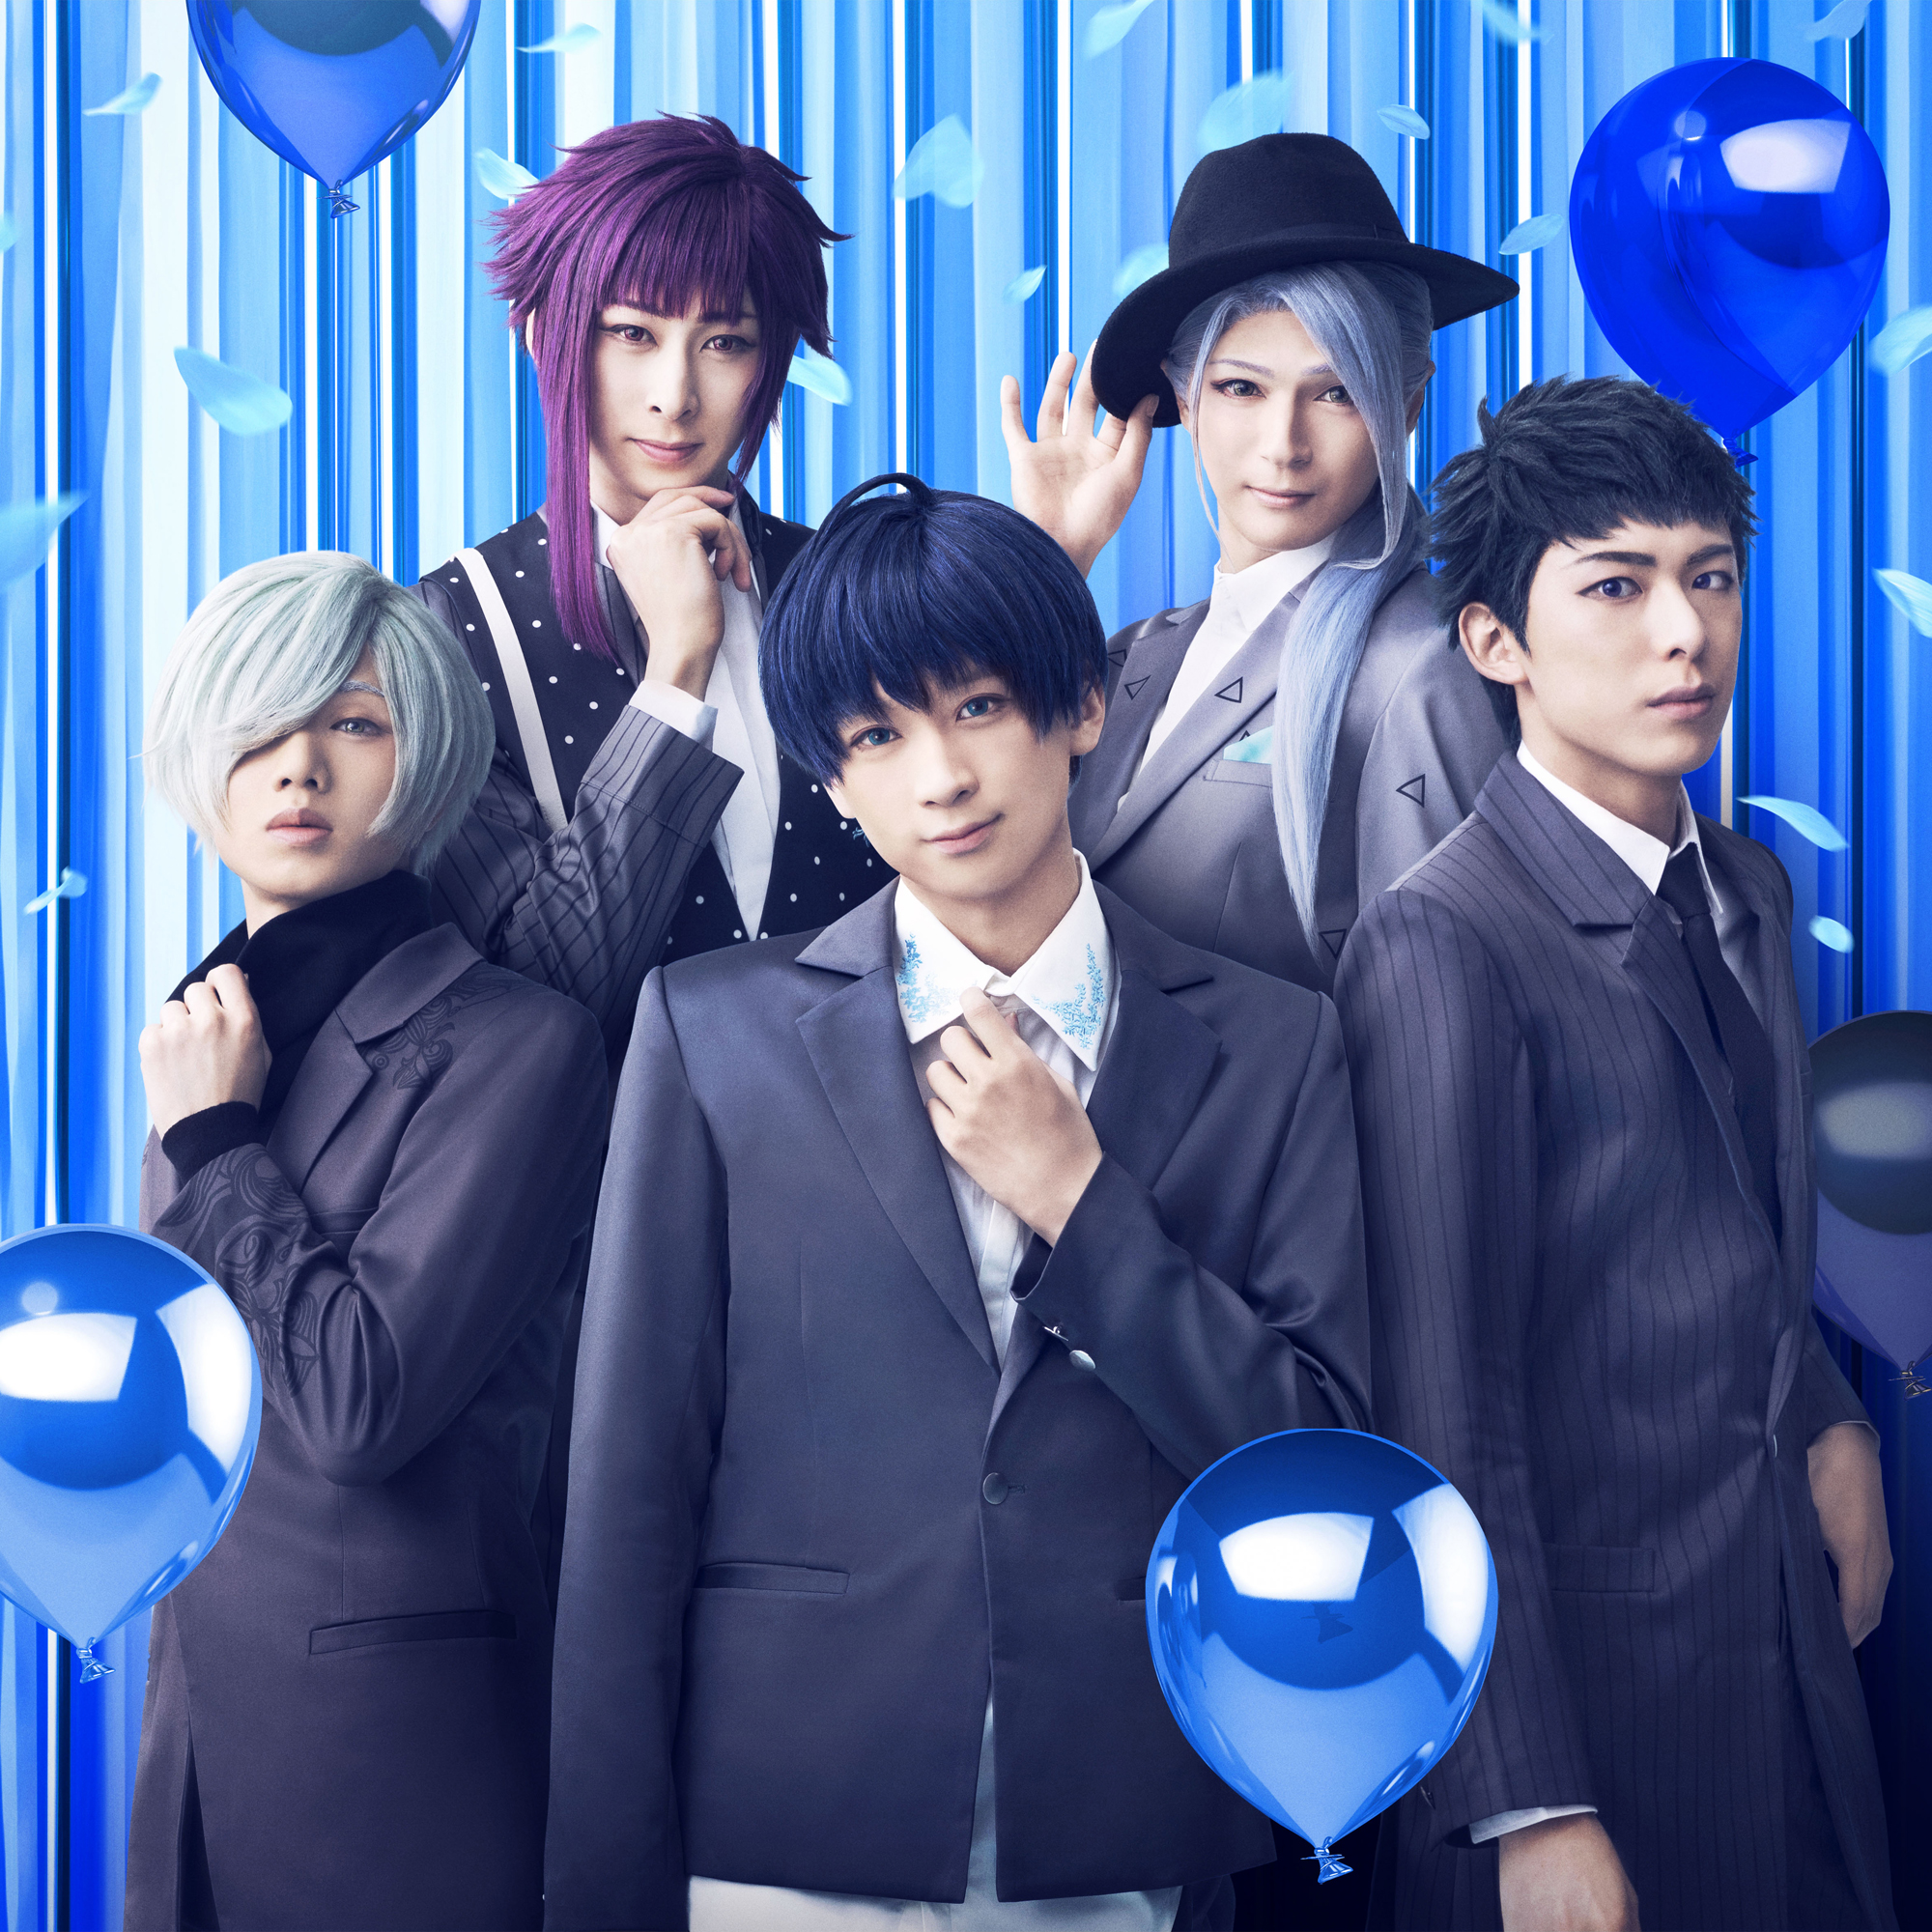 MANKAI STAGE『A3!』ACT2! ～AUTUMN 2022～」MUSIC COLLECTION | きゃにめ